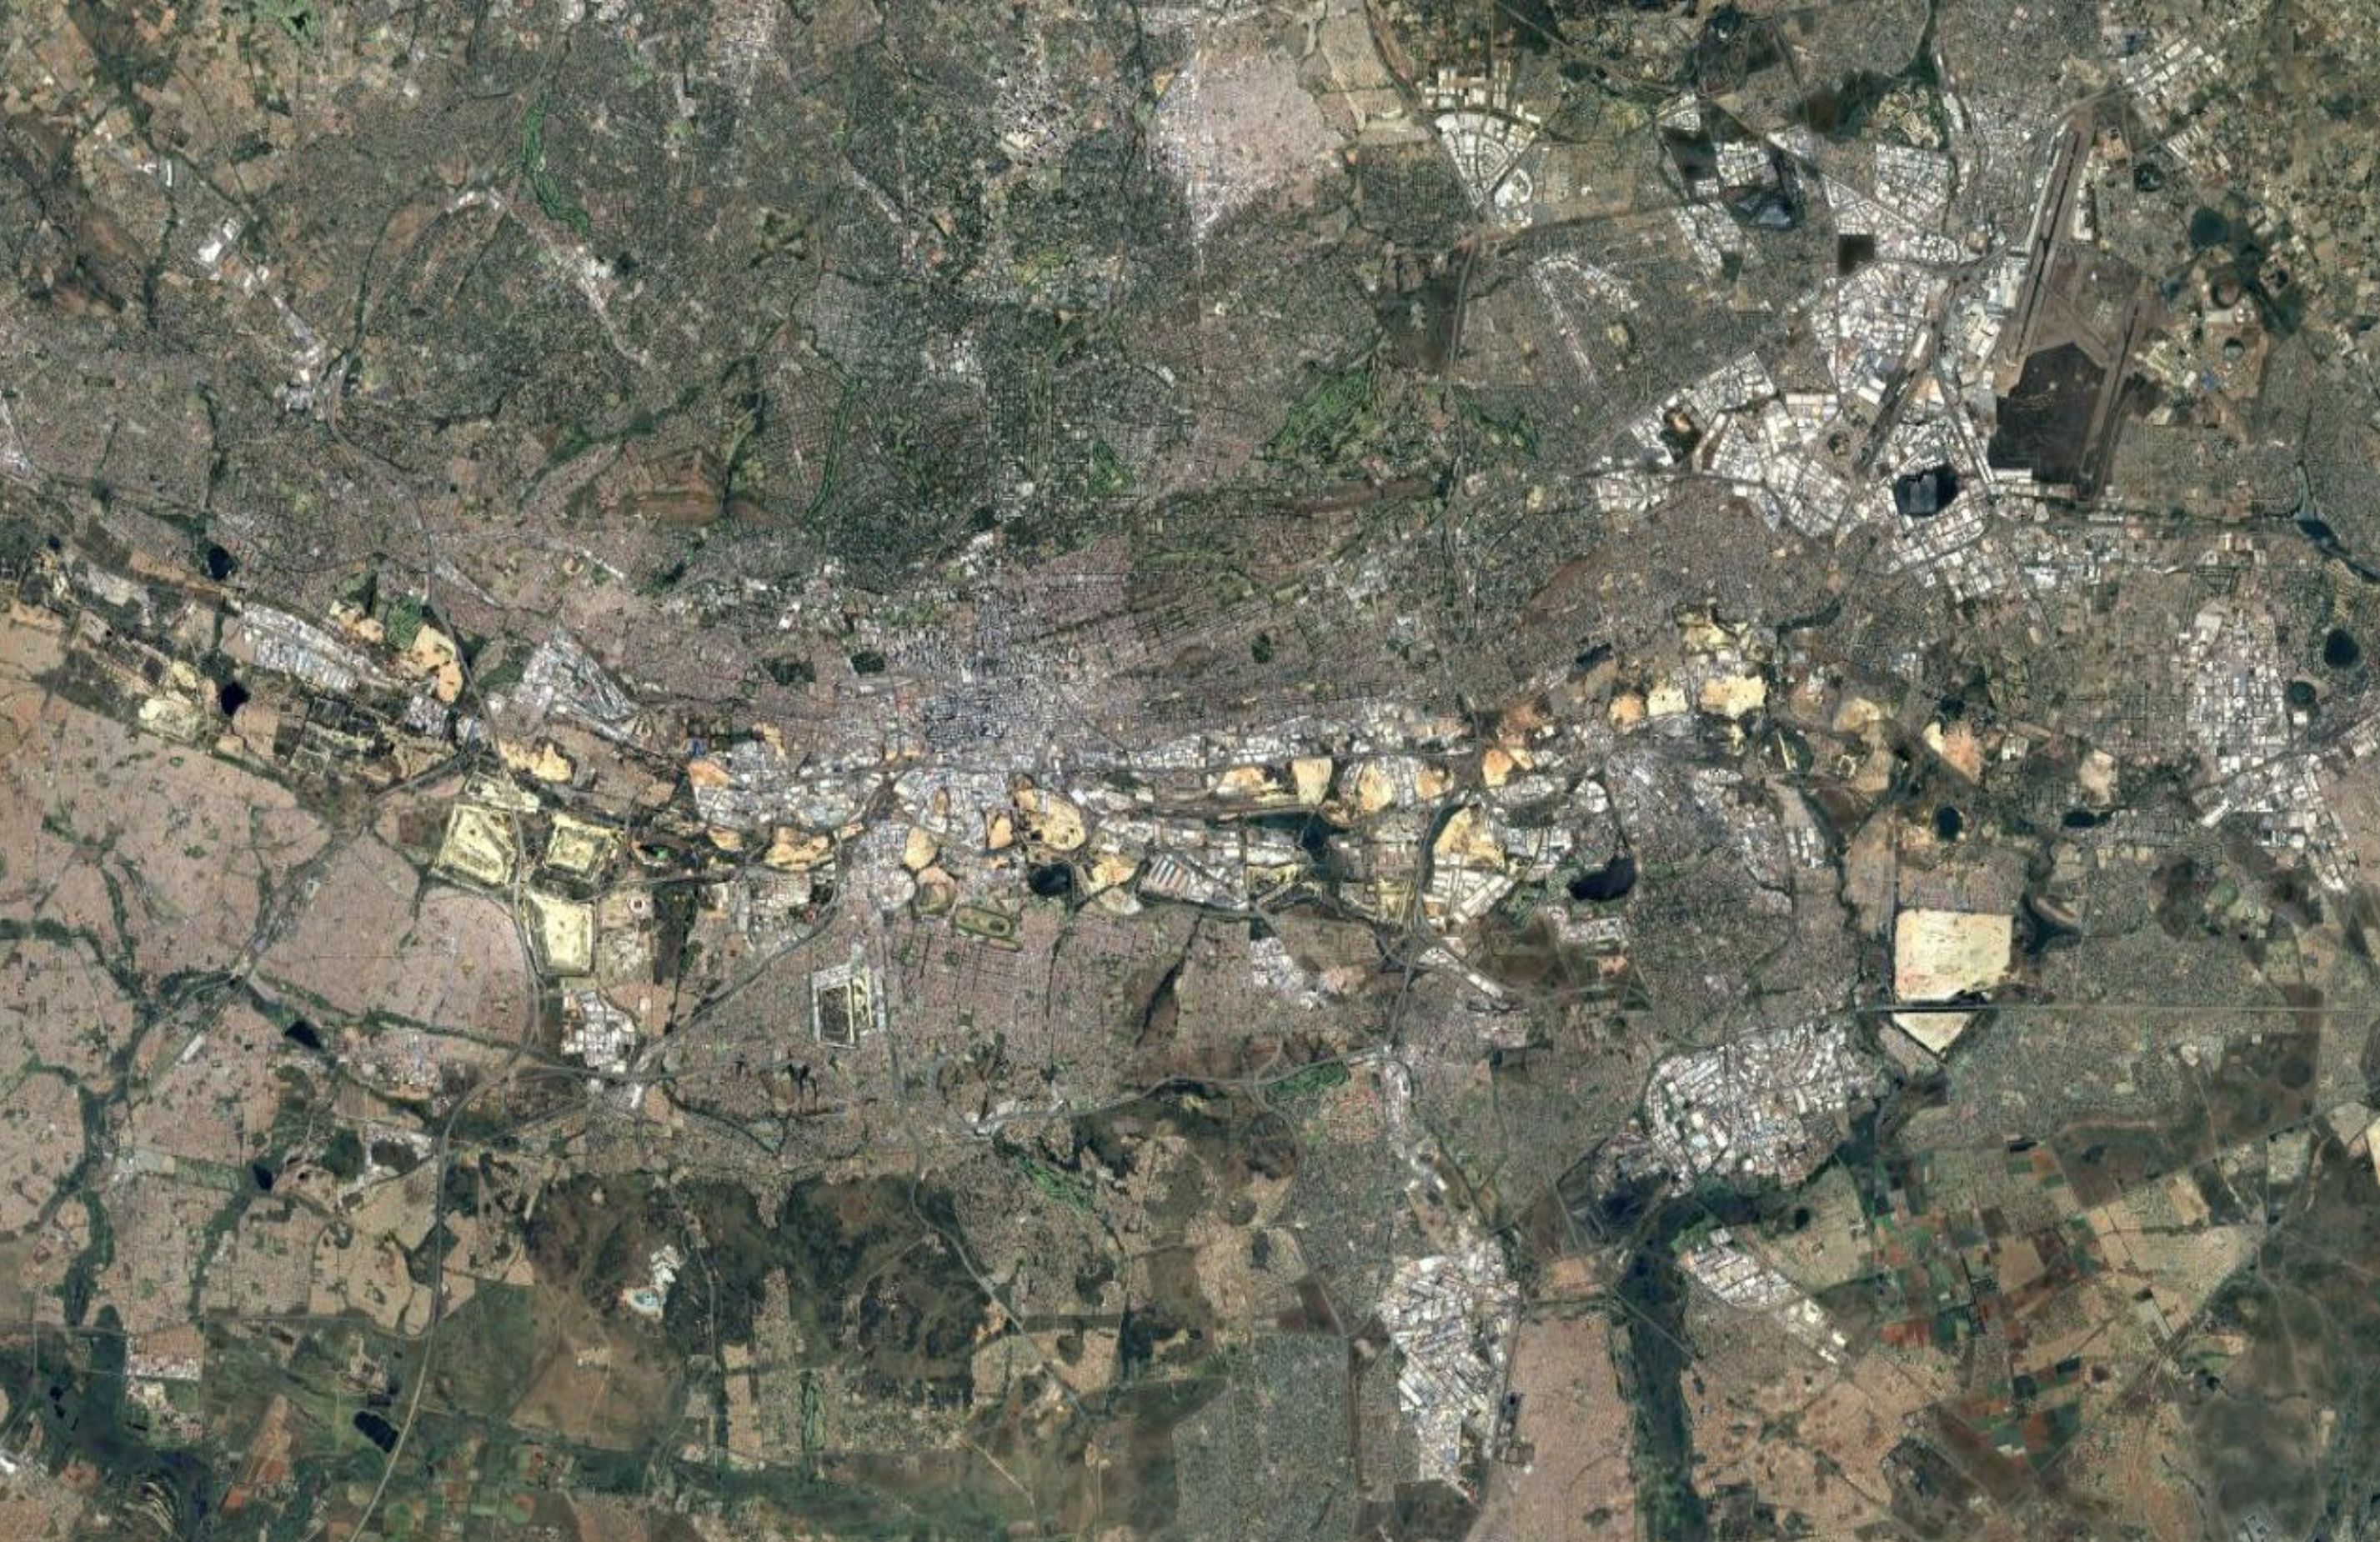 Johannesburg and surroundings, from space. Google Maps view, November, 2023.